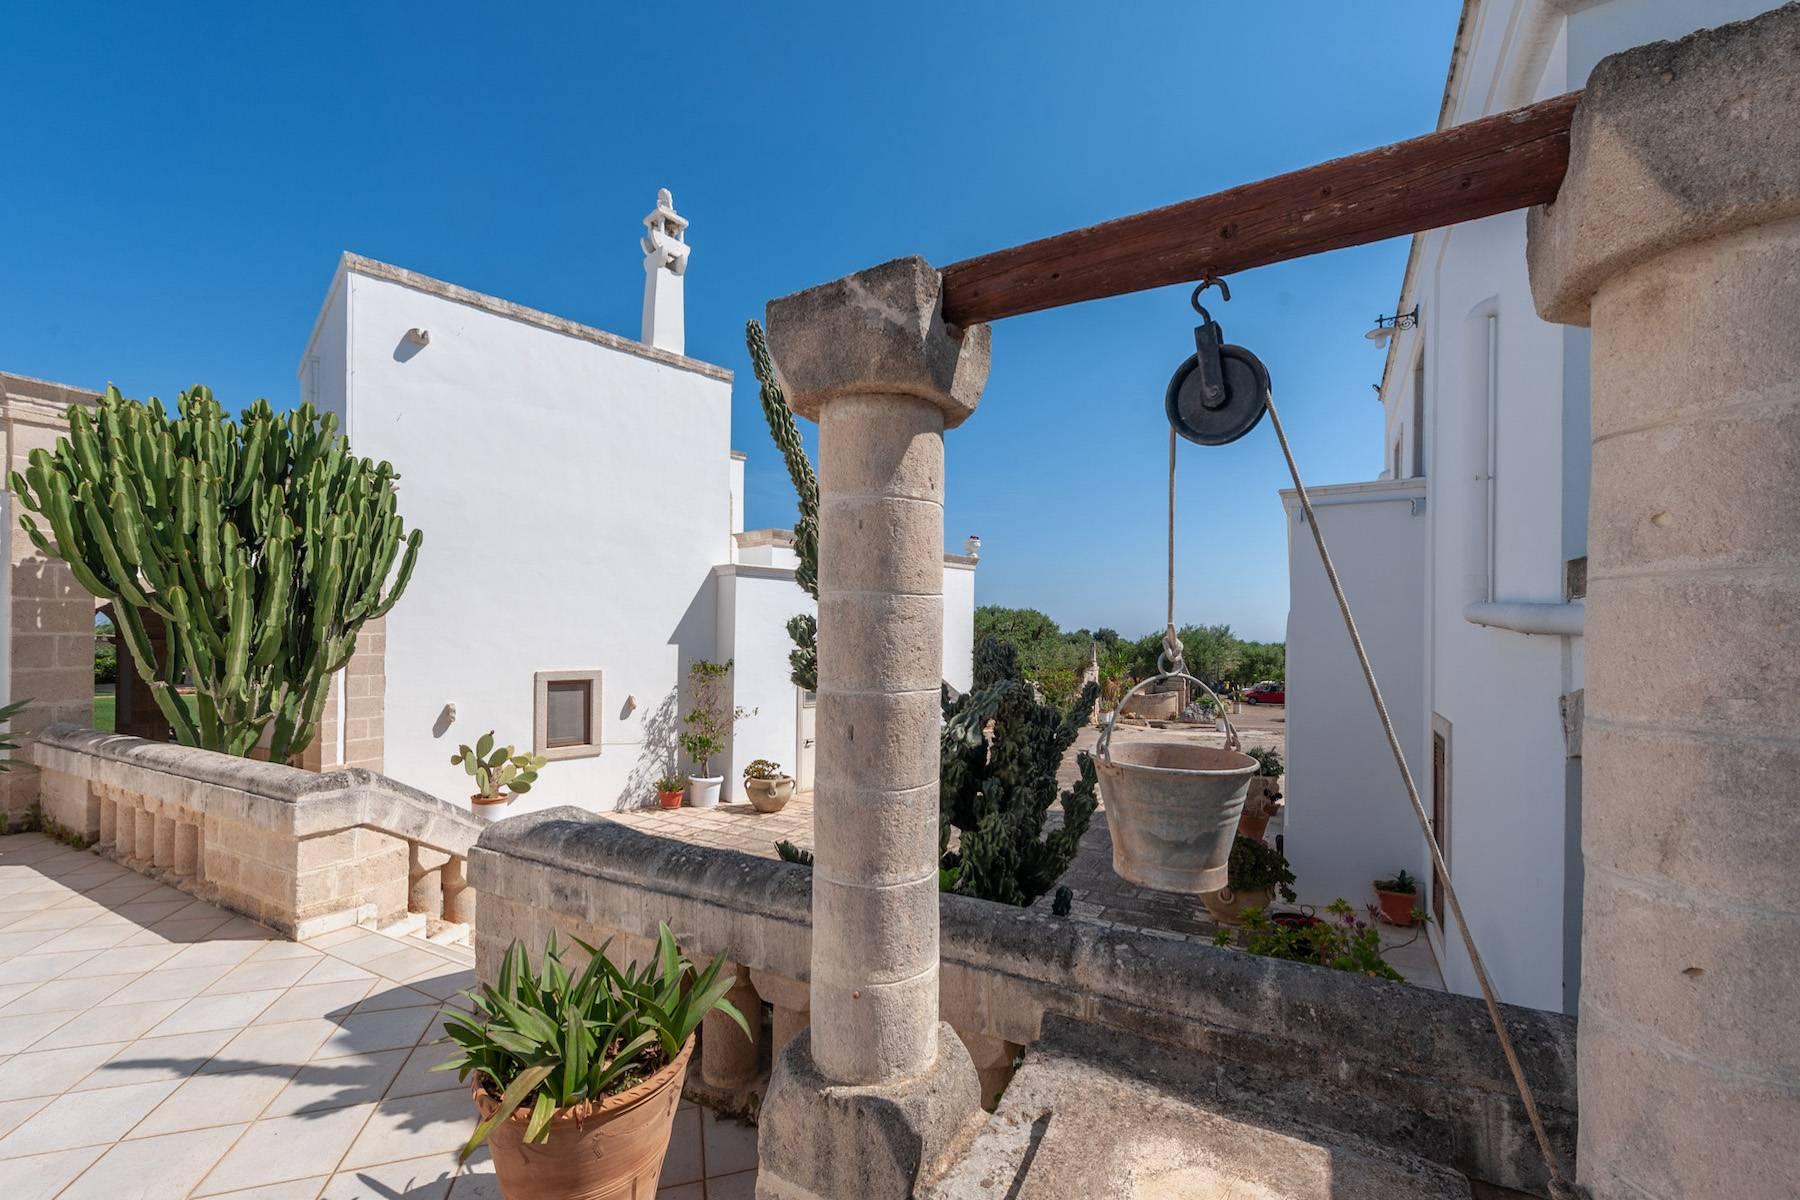 Charming 18th century Masseria surrounded by centuries-old olive trees - 5